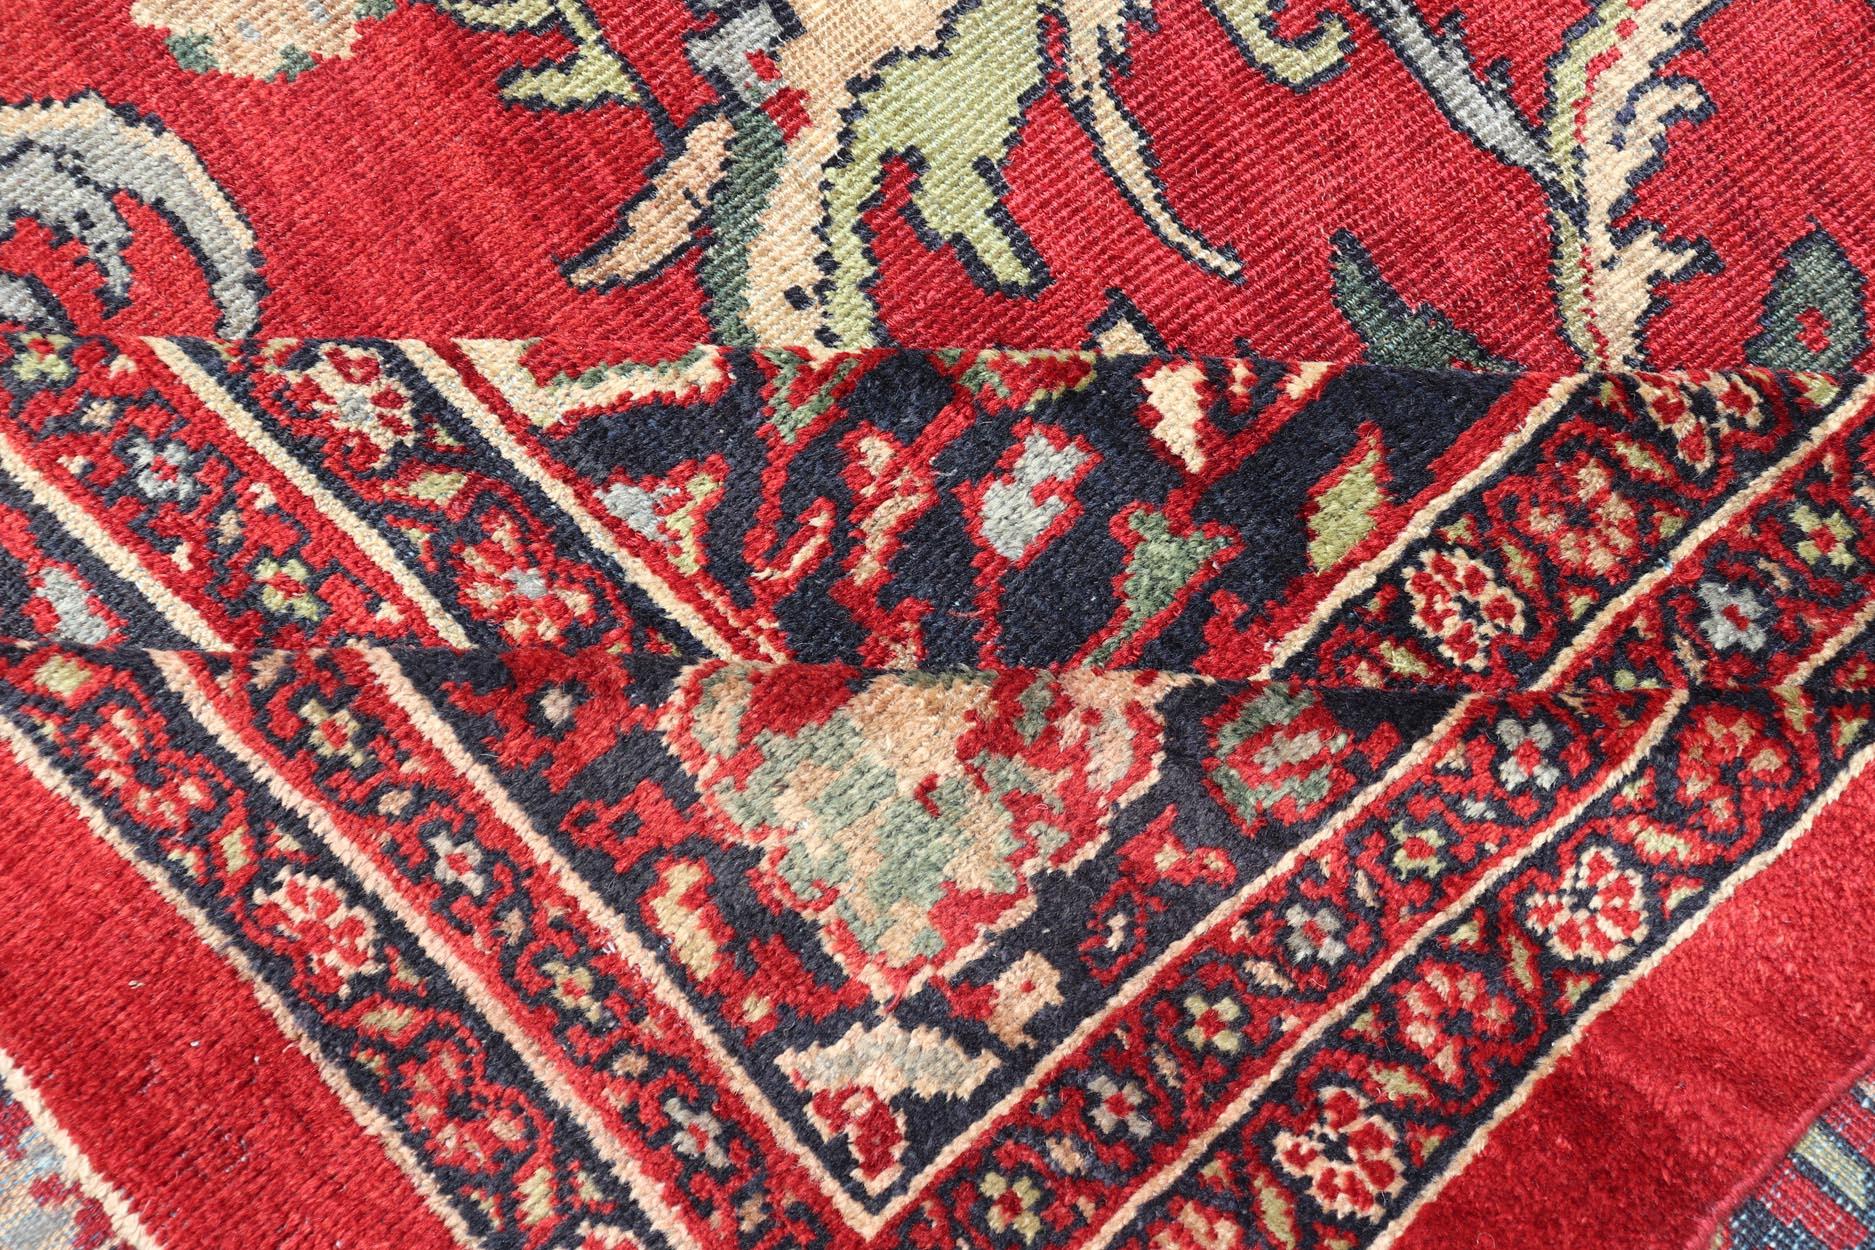 Antique Persian Zeigler Sultanabad Rug with Botanical Elements Set on Red Field For Sale 10